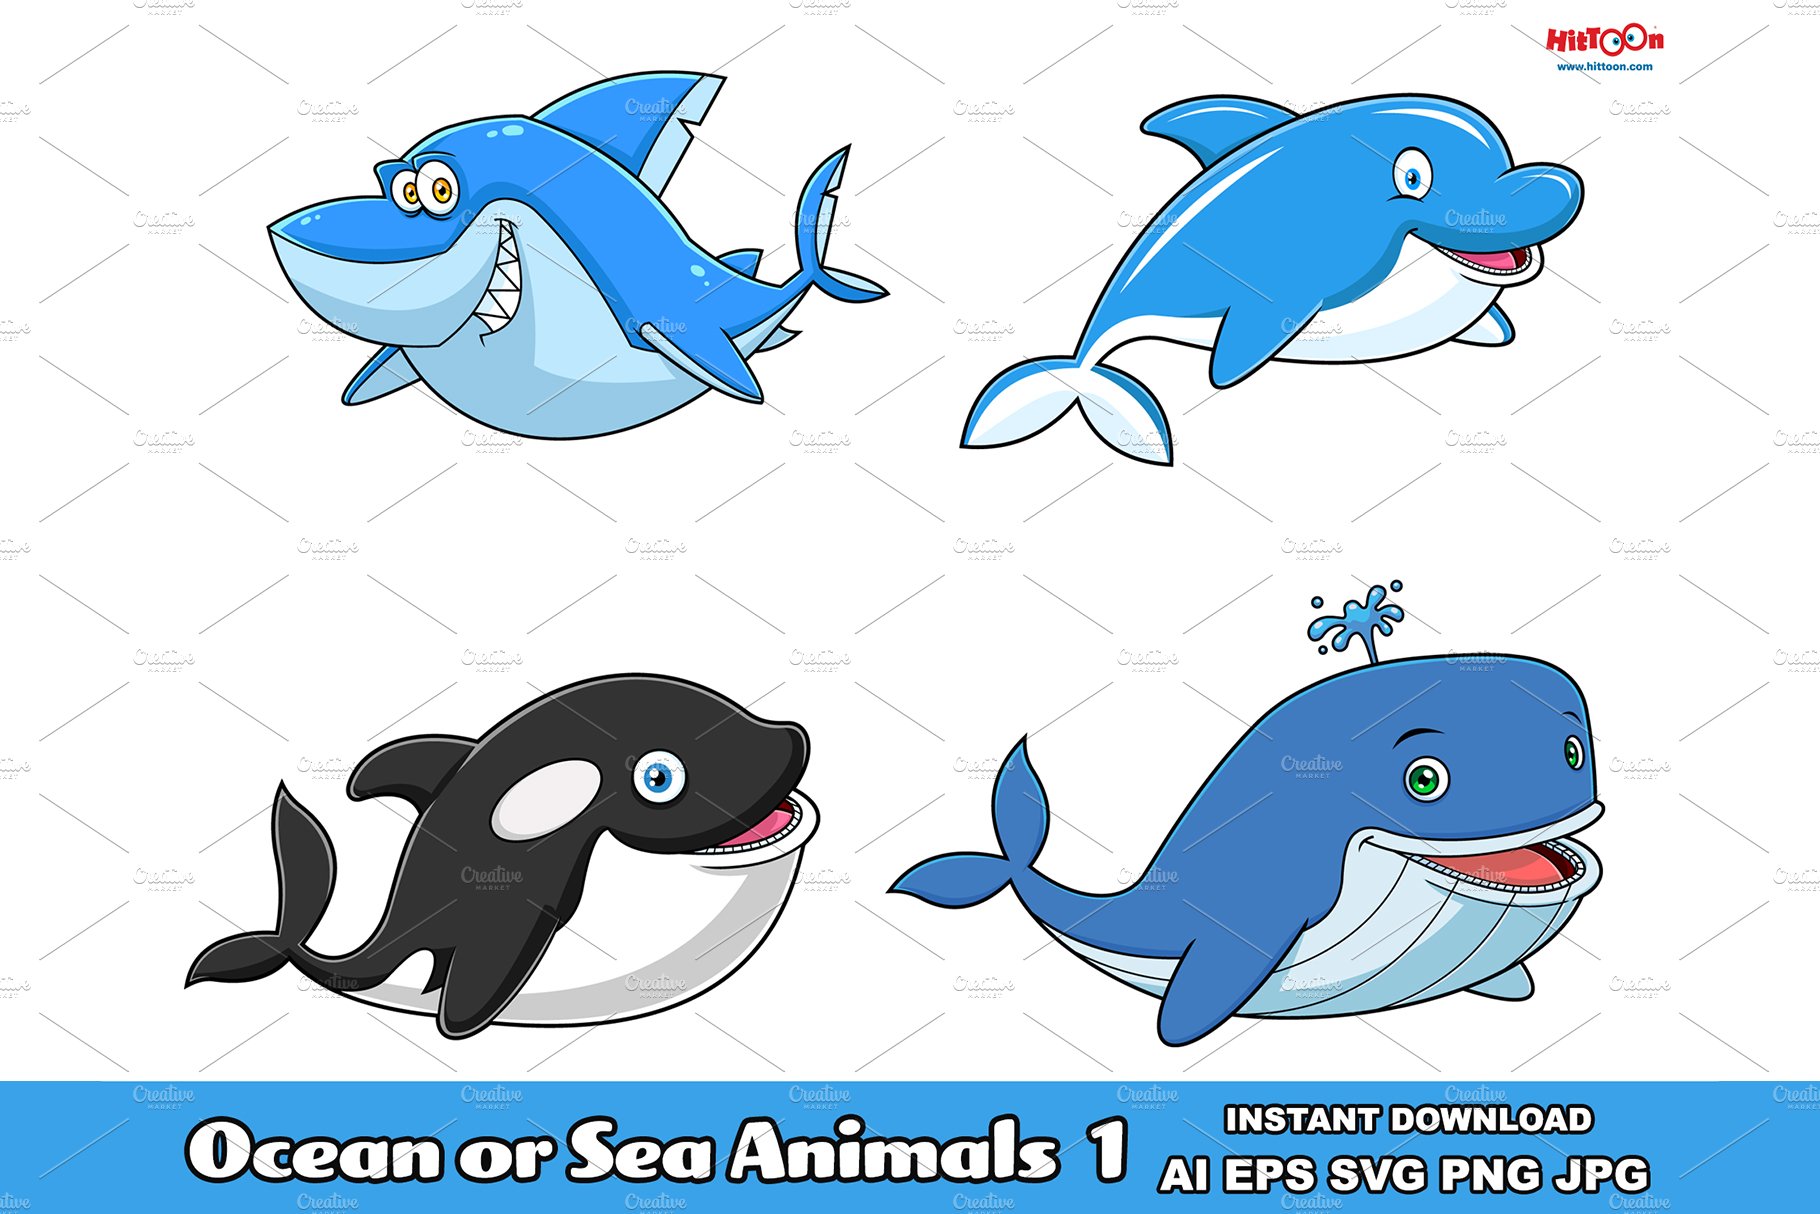 Ocean Or Sea Animals Characters 1 cover image.